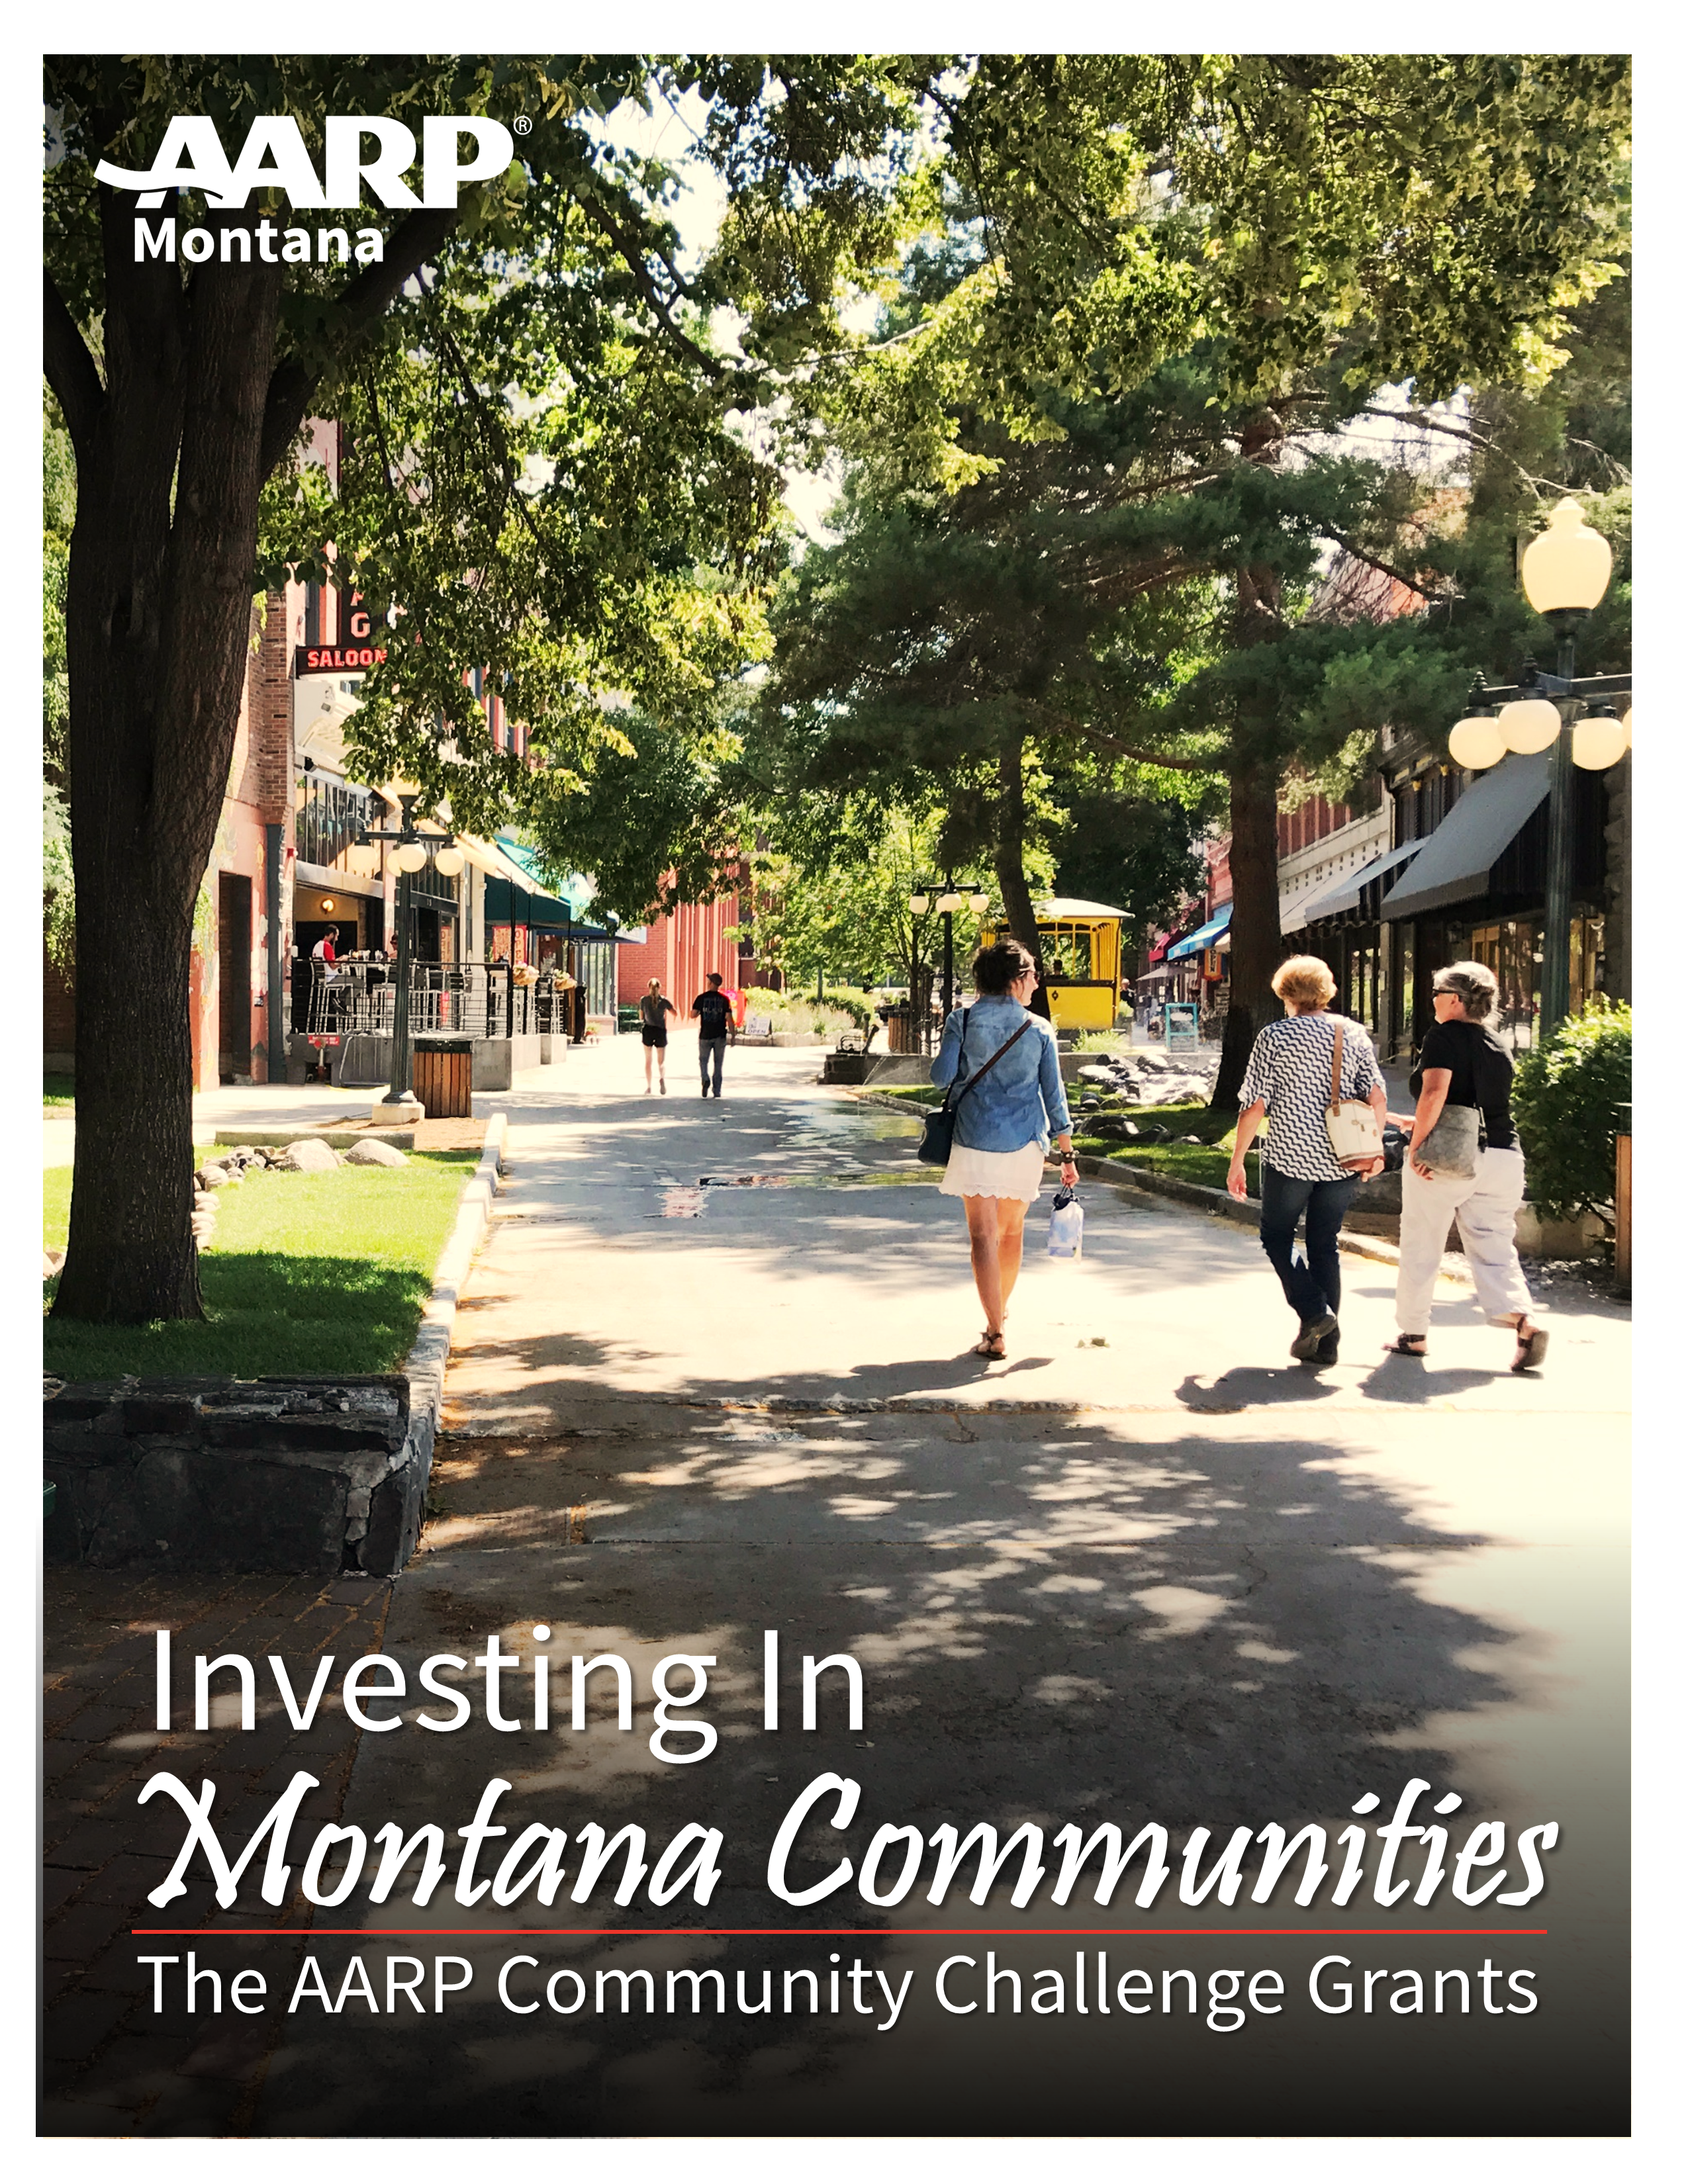 Investing in Montana Communities Cover Design.png